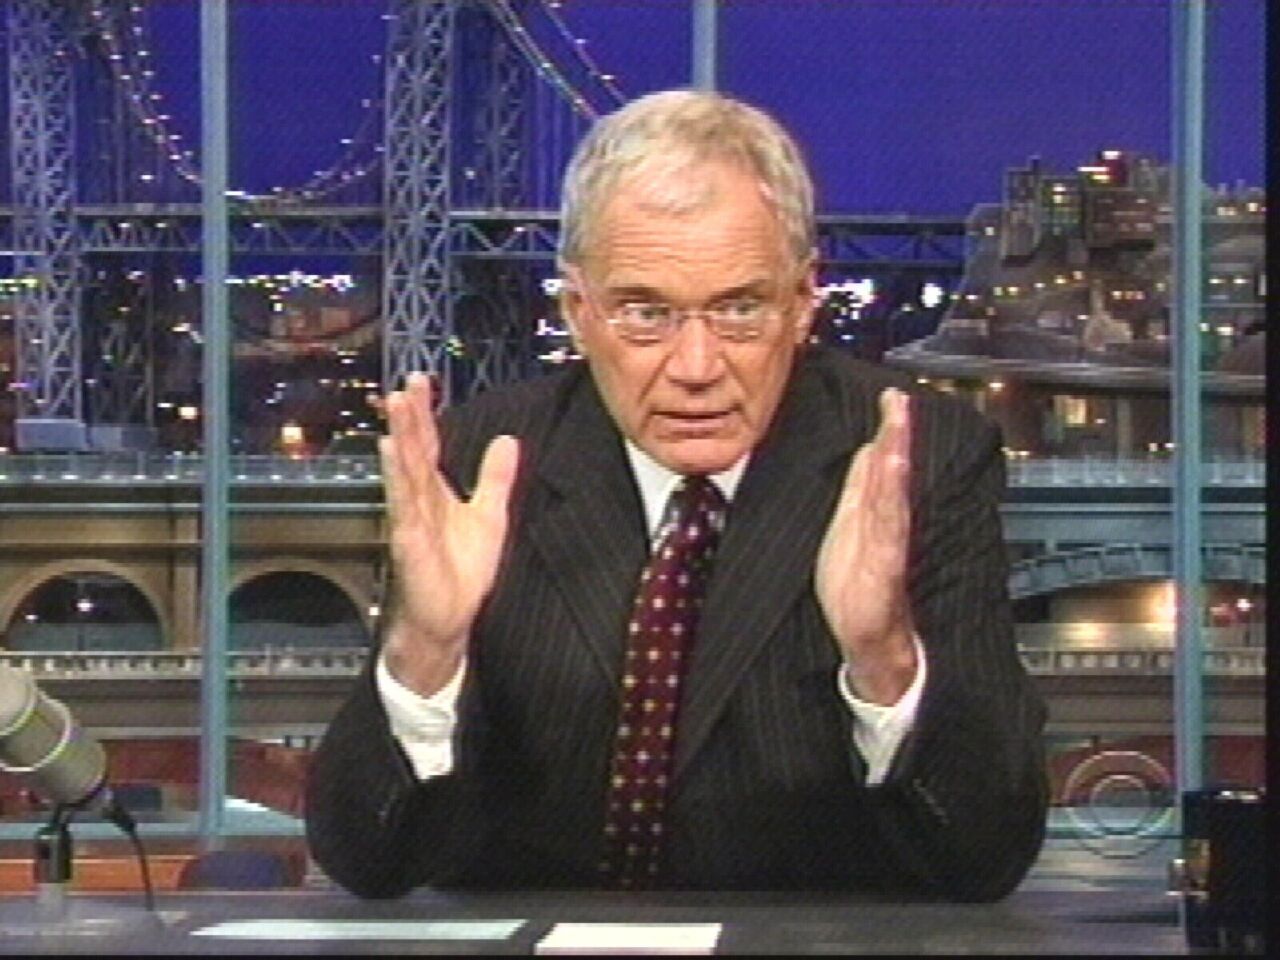 On Oct. 1, 2009, David Letterman devoted a 10-minute-long "Late Show" monologue to the revelation that he had sexual relationships with female employees and that someone tried to extort $2 million from him over the affairs. While saying that he felt "menaced" by extortion suspect Robert Joel Halderman, a former CBS producer who planned to write a screenplay about the affairs, the comic did not express any contrition for cheating on his wife, Regina Lasko, whom he dated for 23 years before their marriage in March 2009. Letterman said Haldermen sent him a note saying, "'I know that you do some terrible terrible things and I can prove that you do these terrible things'... and sure enough what was contained in the package was proof that I do terrible, terrible things." "I have had sex with women who worked on this show," Letterman told the audience matter-of-factly. "And would it be embarrassing if it were made public? Perhaps it would. Especially for the women."